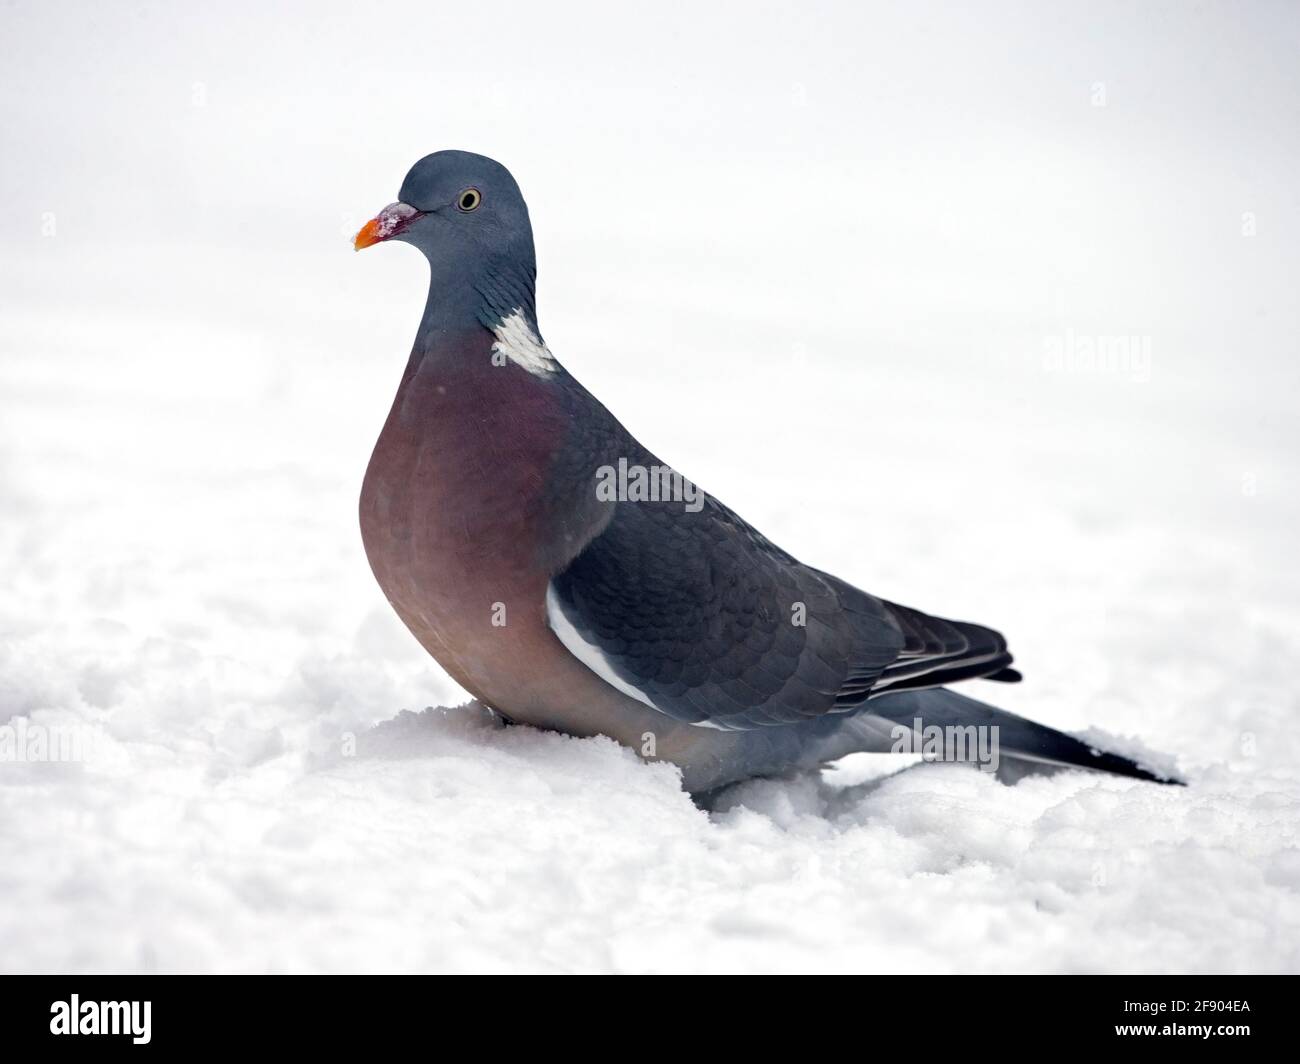 Common wood pigeon standing in snow Stock Photo